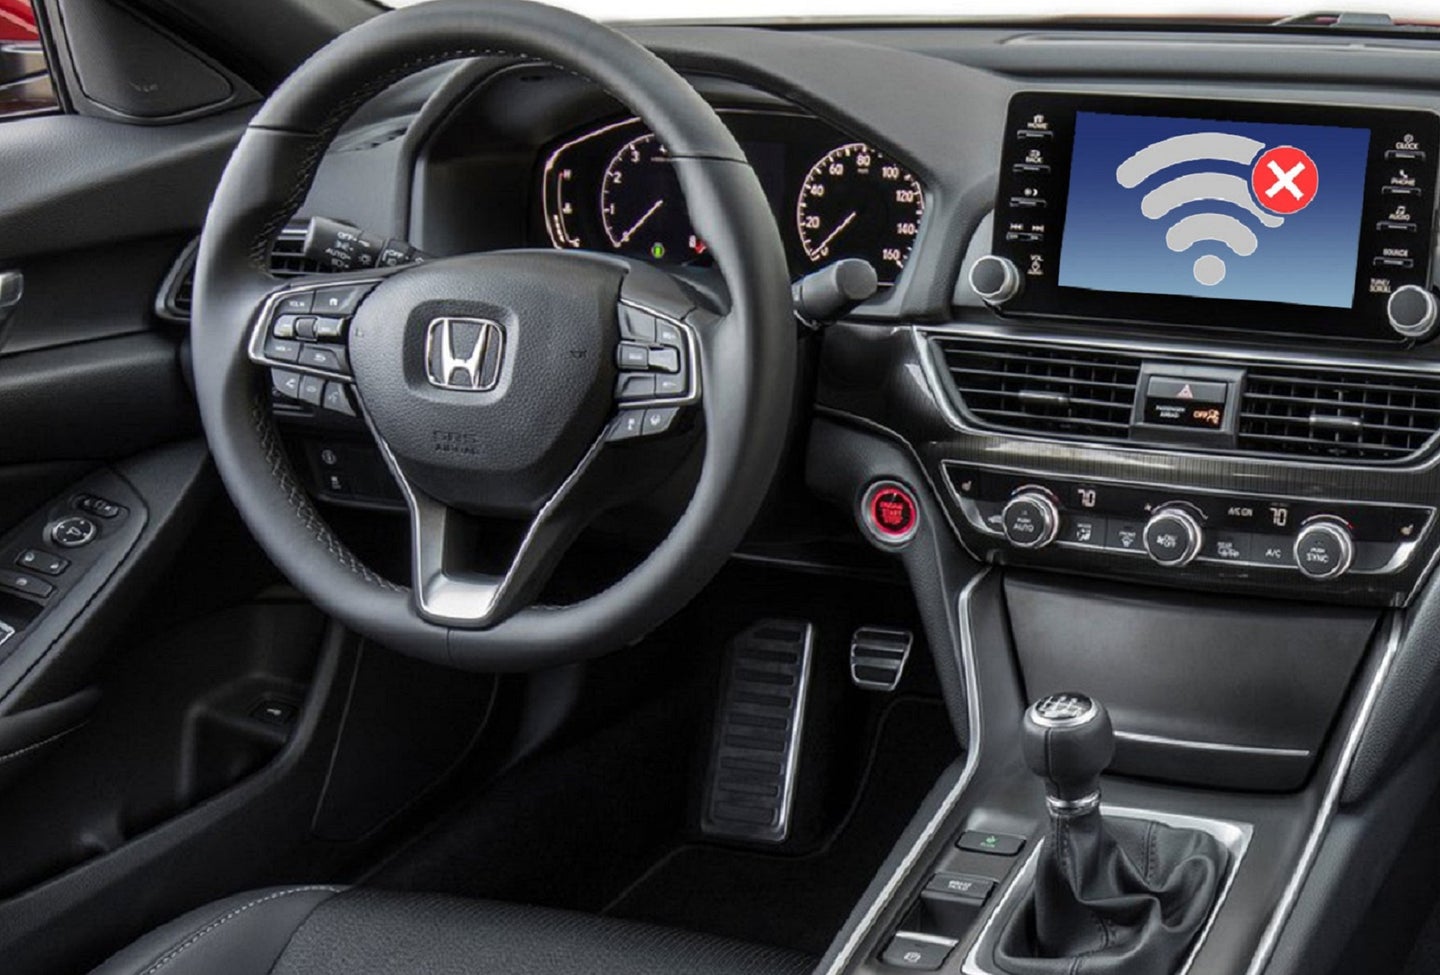 Honda driver assistance screen showing no WiFi because of the switch from 3g to 5g